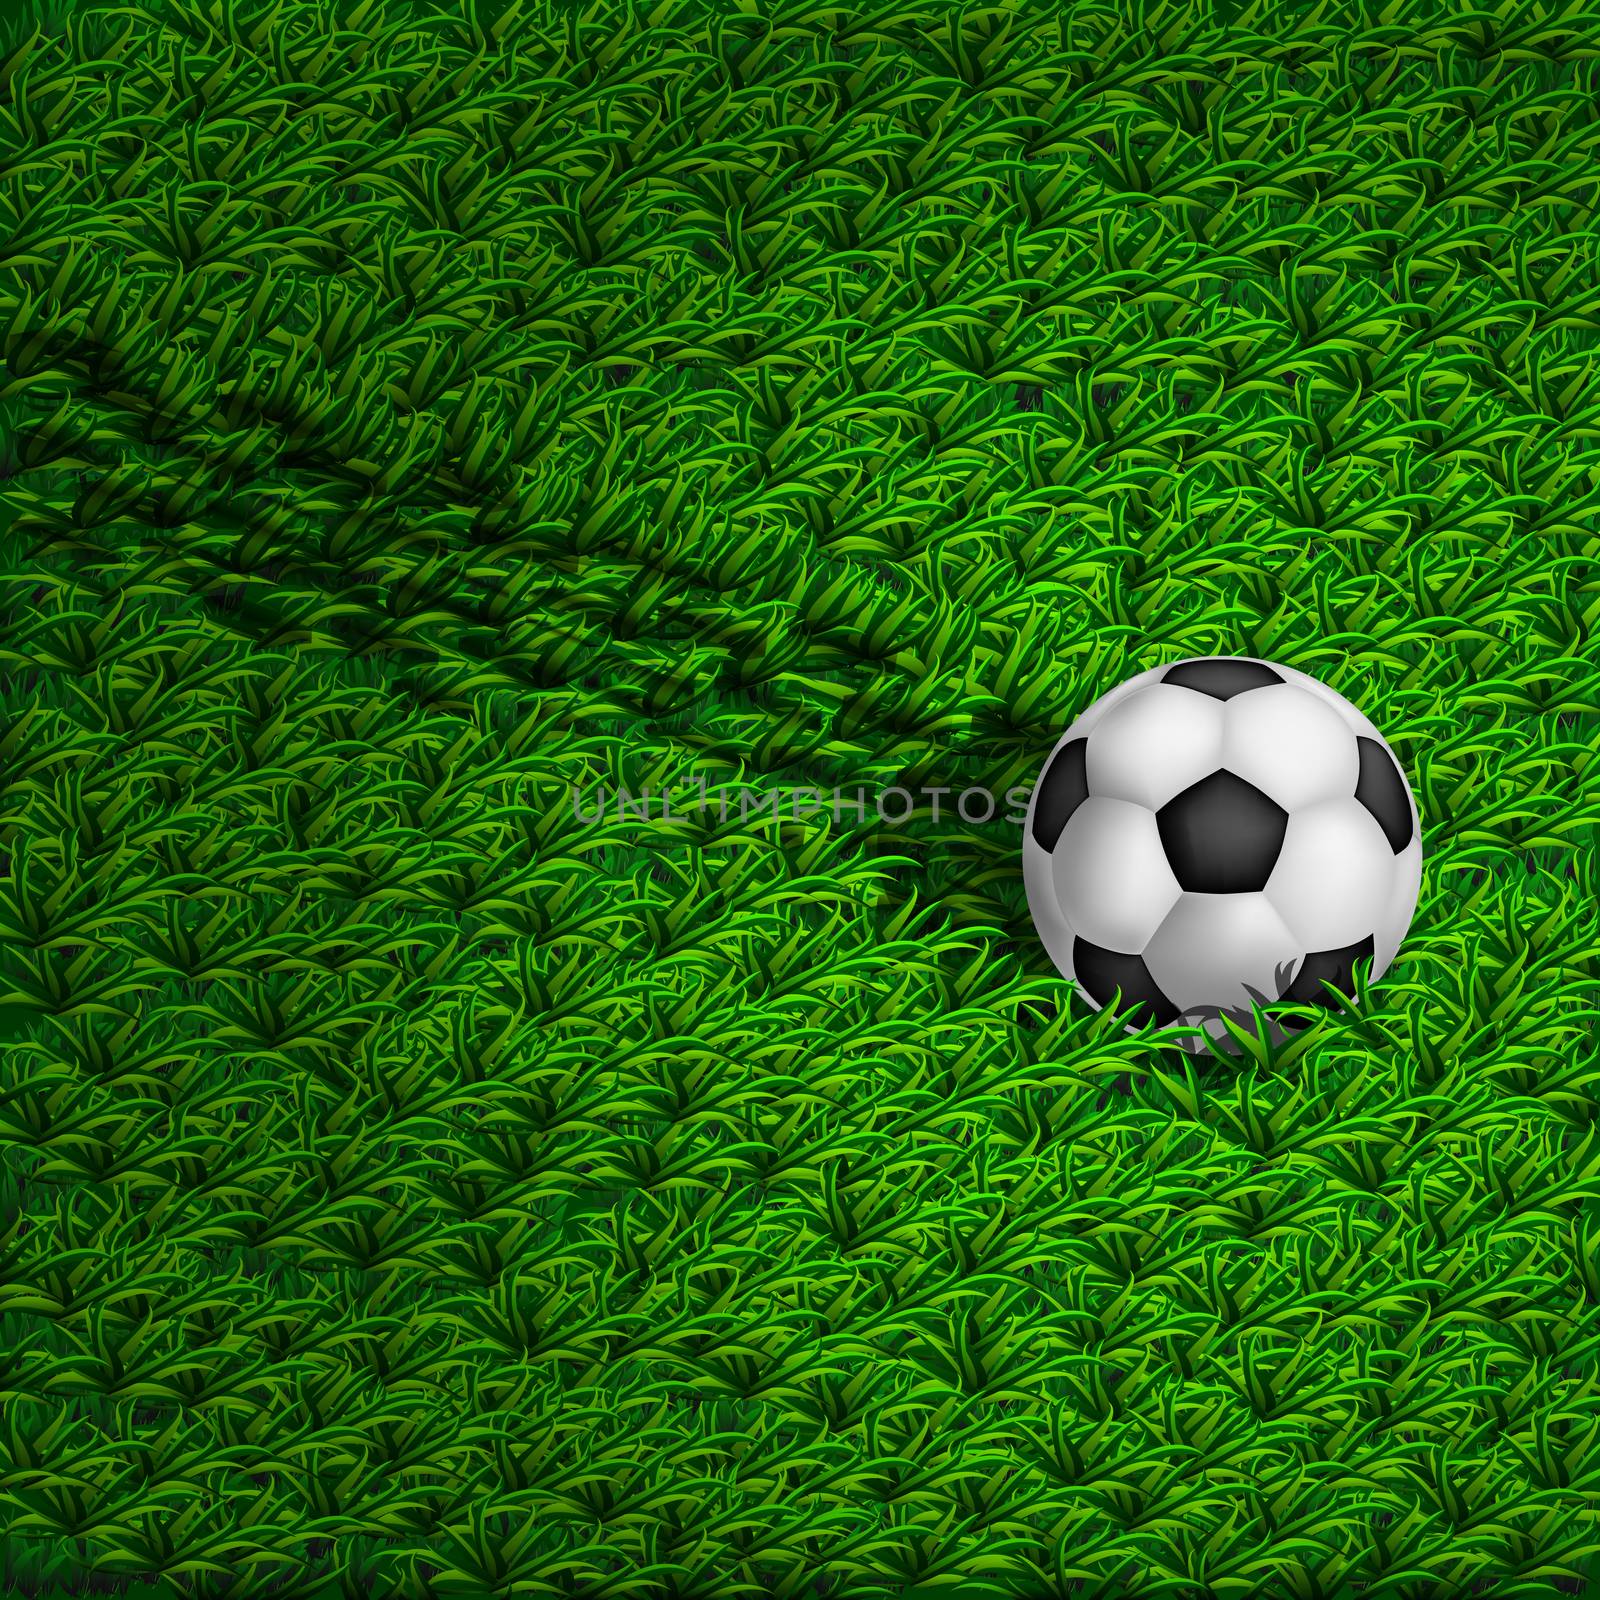 The soccer ball rolls on the grass and leaves a trail